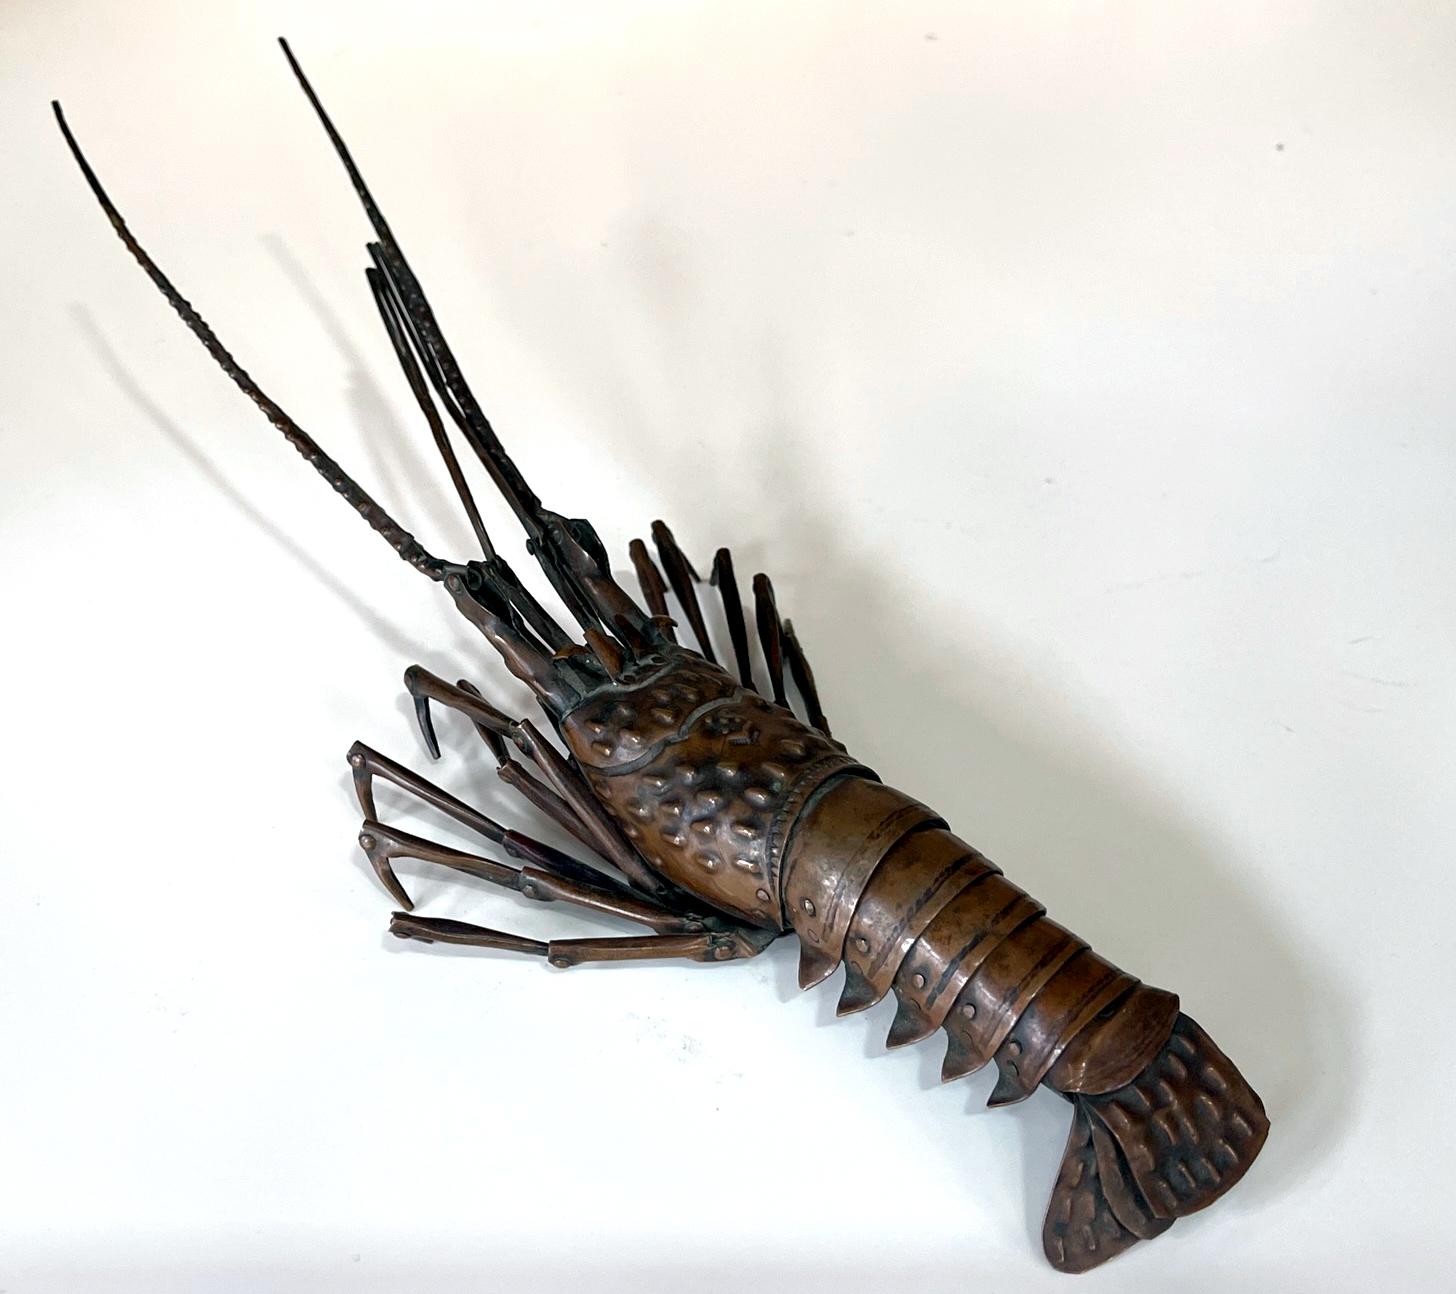 An articulate spiny lobster (Ise-Ebi) as an ornamental display item, known in Japanese as Jizai Okimono, was made by Myochin Hiroyoshi in the late Meiji Period circa 1890-1900s. The lobster was meticulously constructed in life-size with copper or a